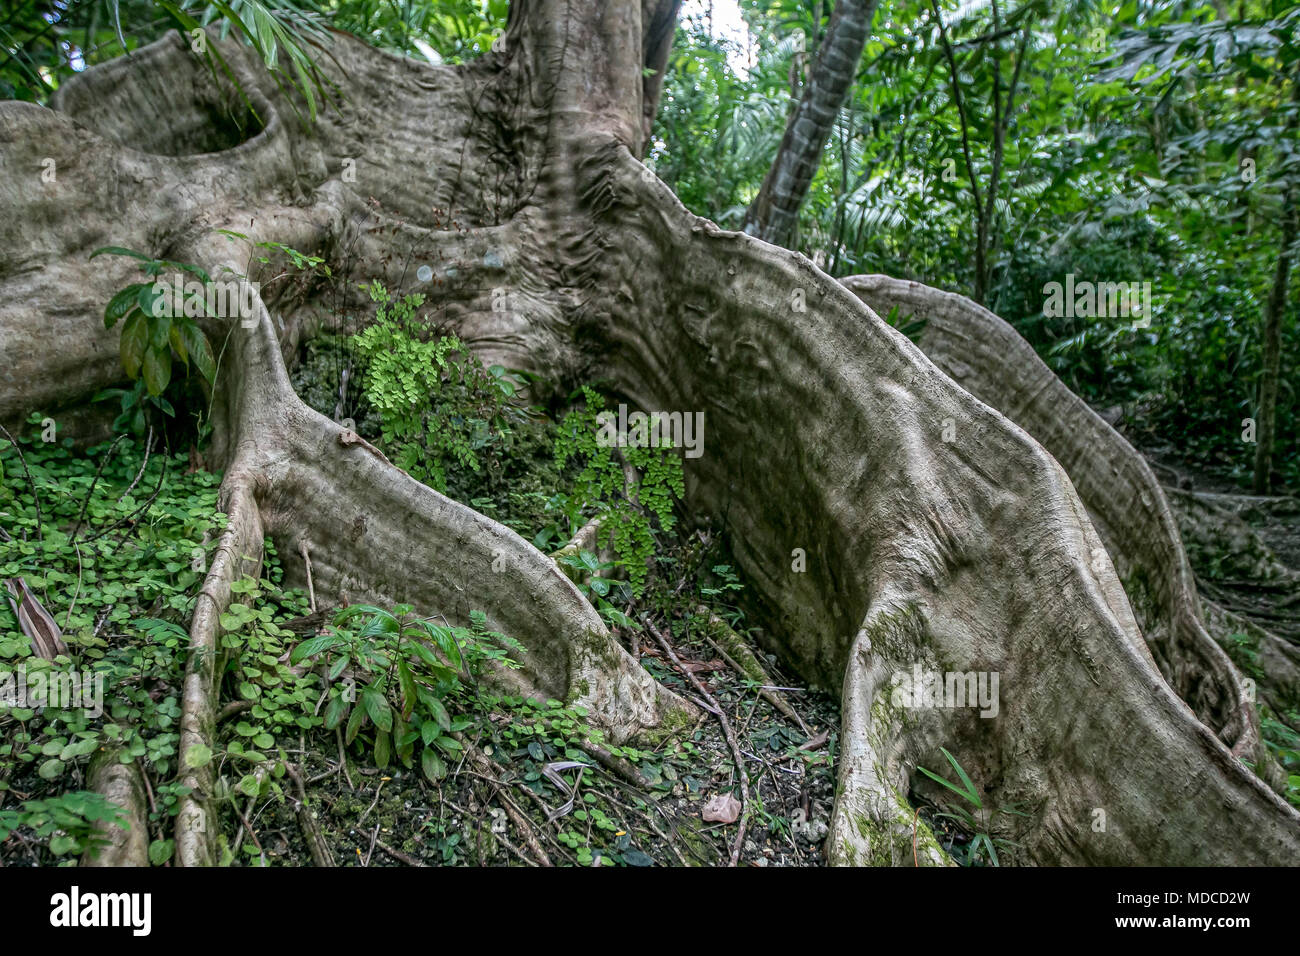 The roots at the base of a flamboyant tree [Delonix regia]. Barbados Botanical Garden. Stock Photo